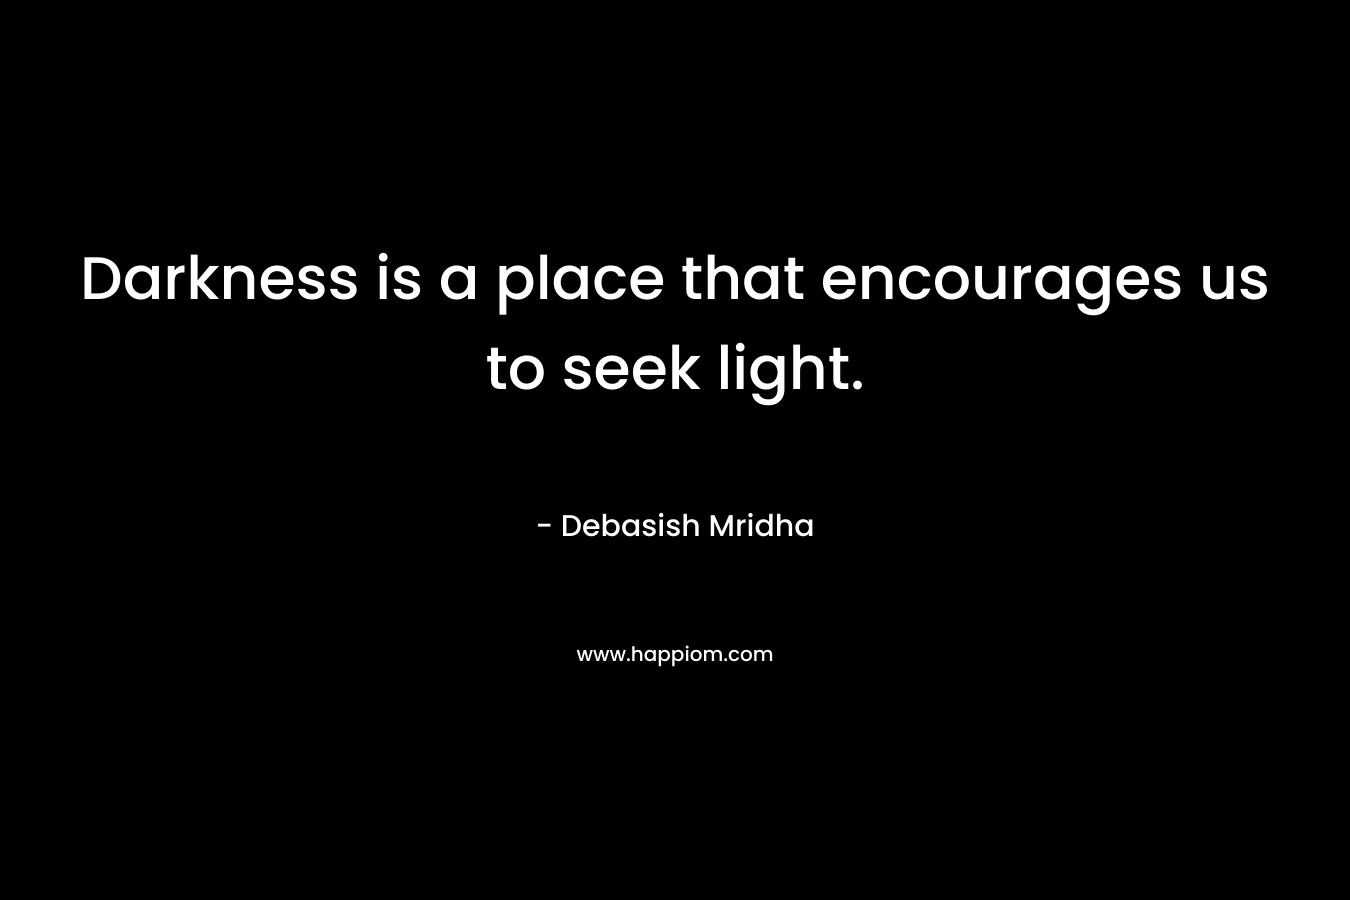 Darkness is a place that encourages us to seek light. – Debasish Mridha